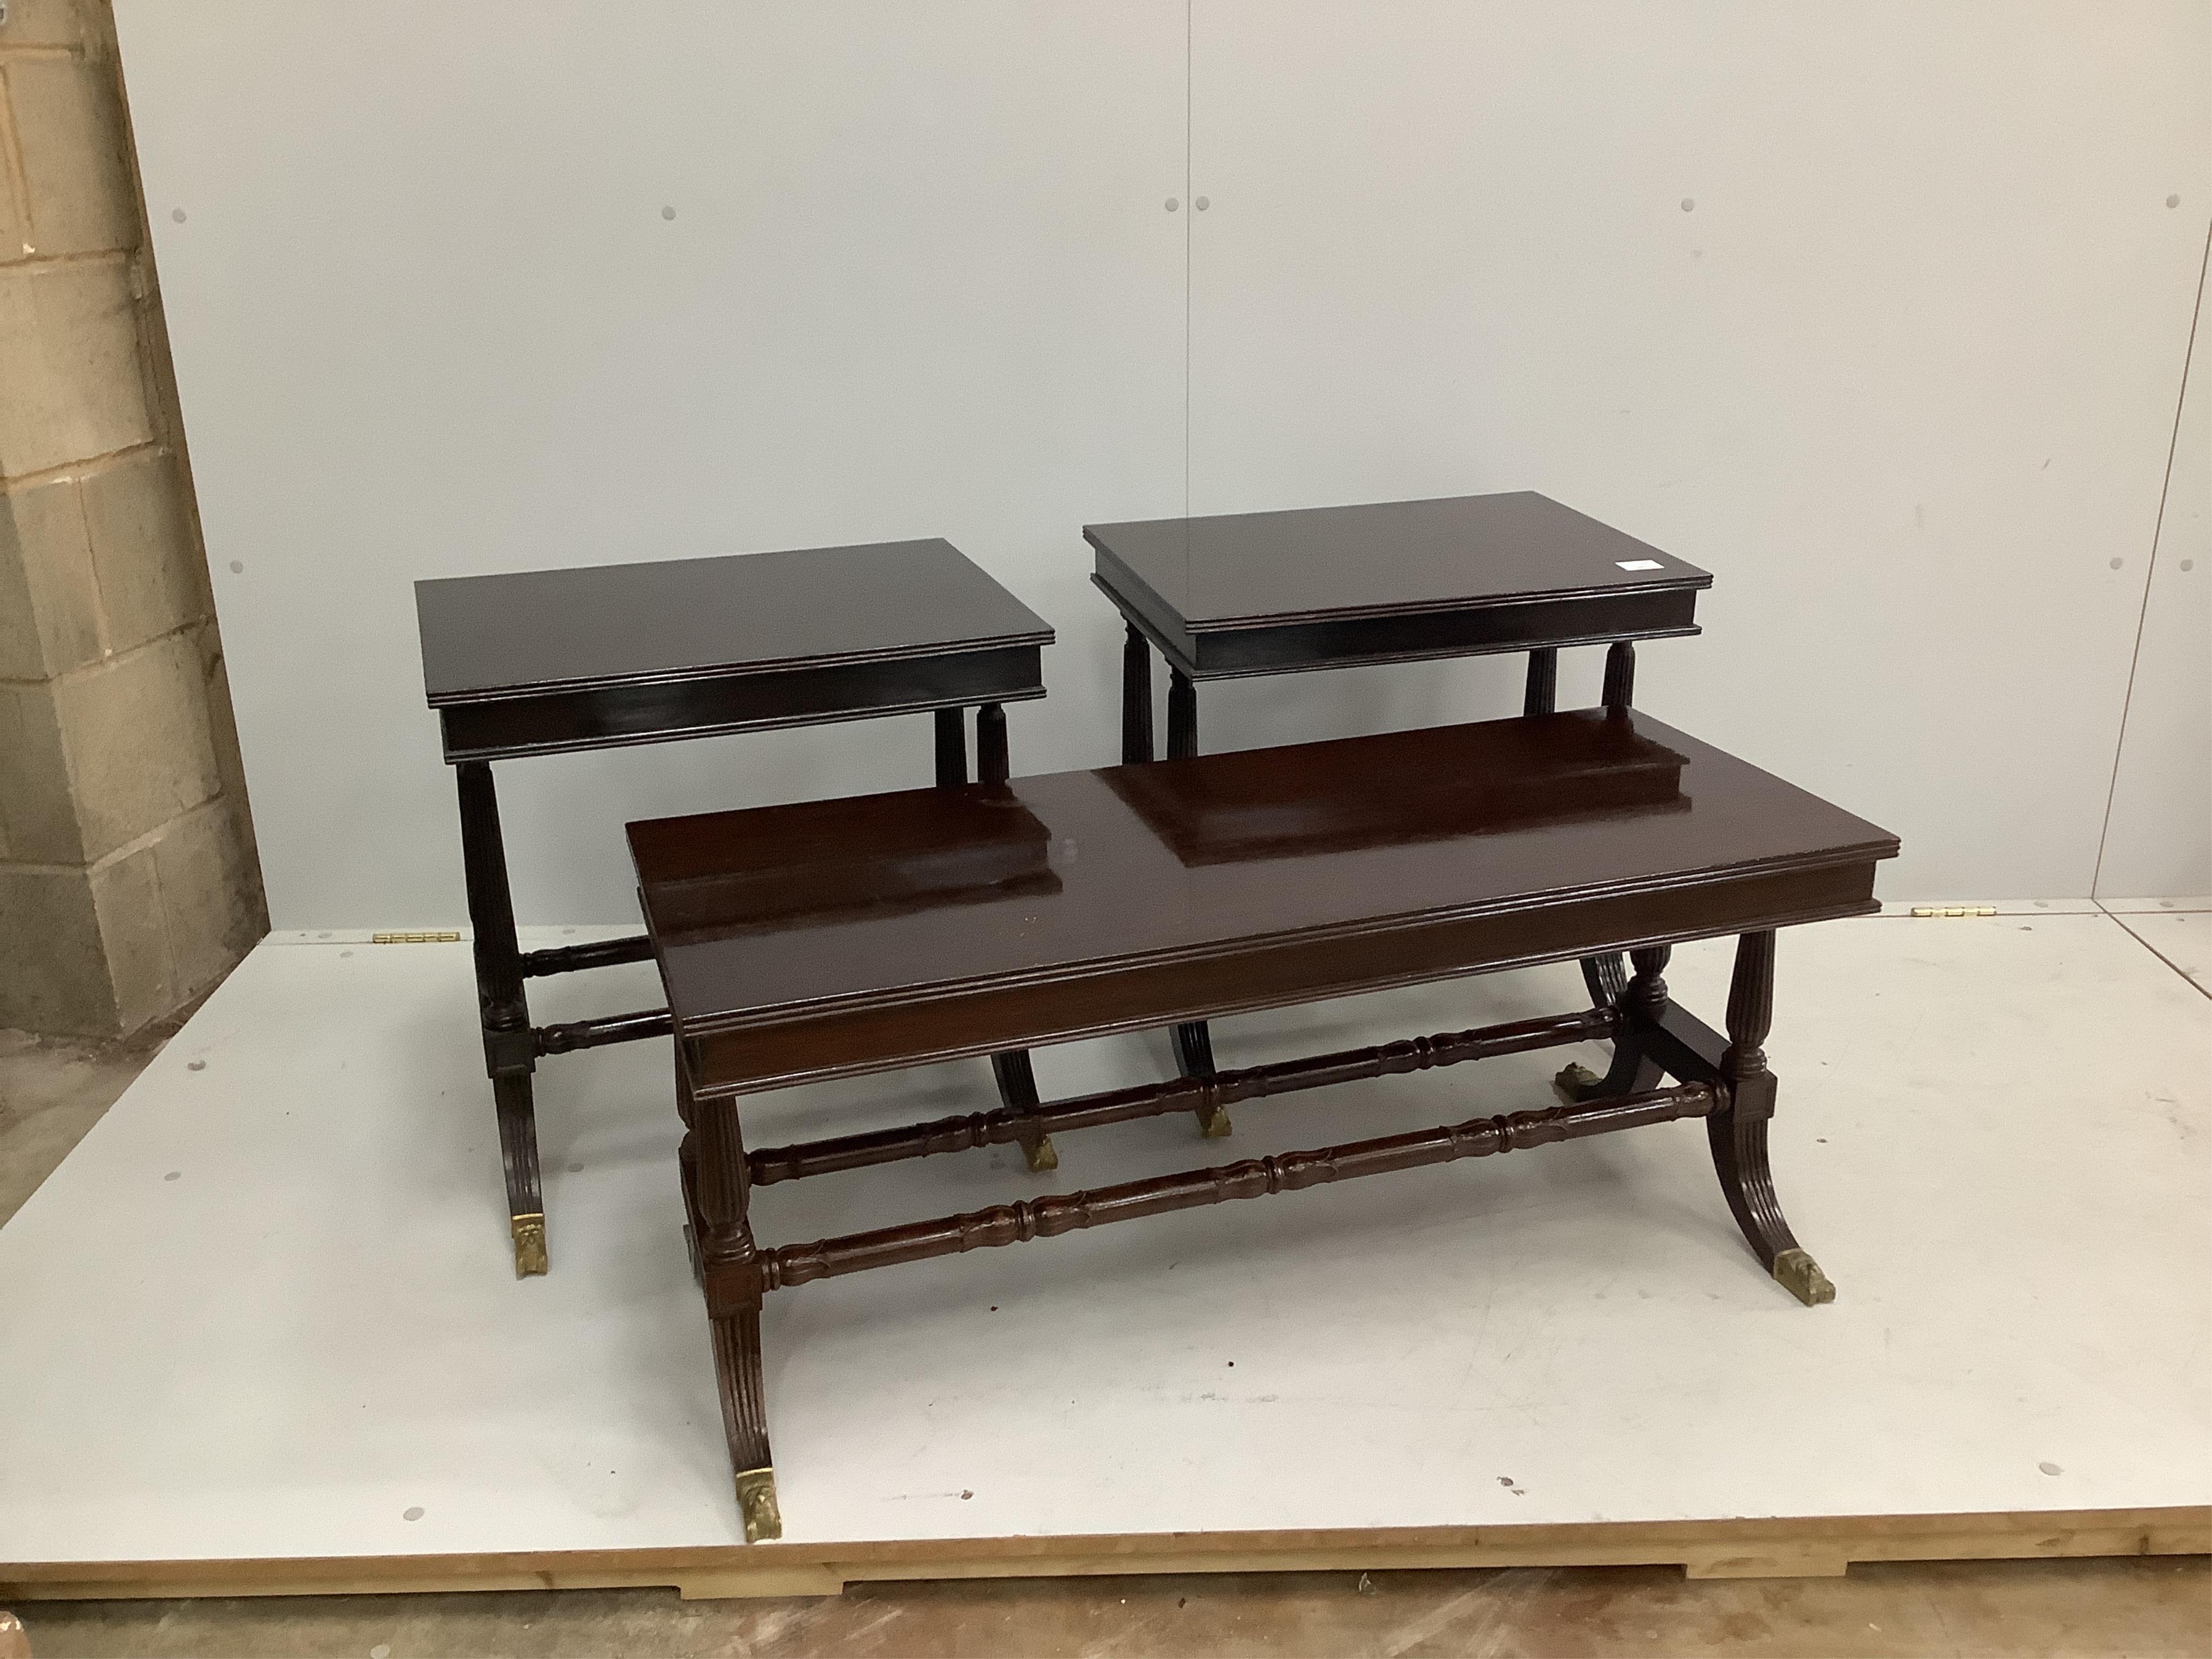 A pair of Regency style rectangular mahogany occasional tables, width 56cm, depth 42cm, height 58cm, together with a matching rectangular coffee table. Condition - fair